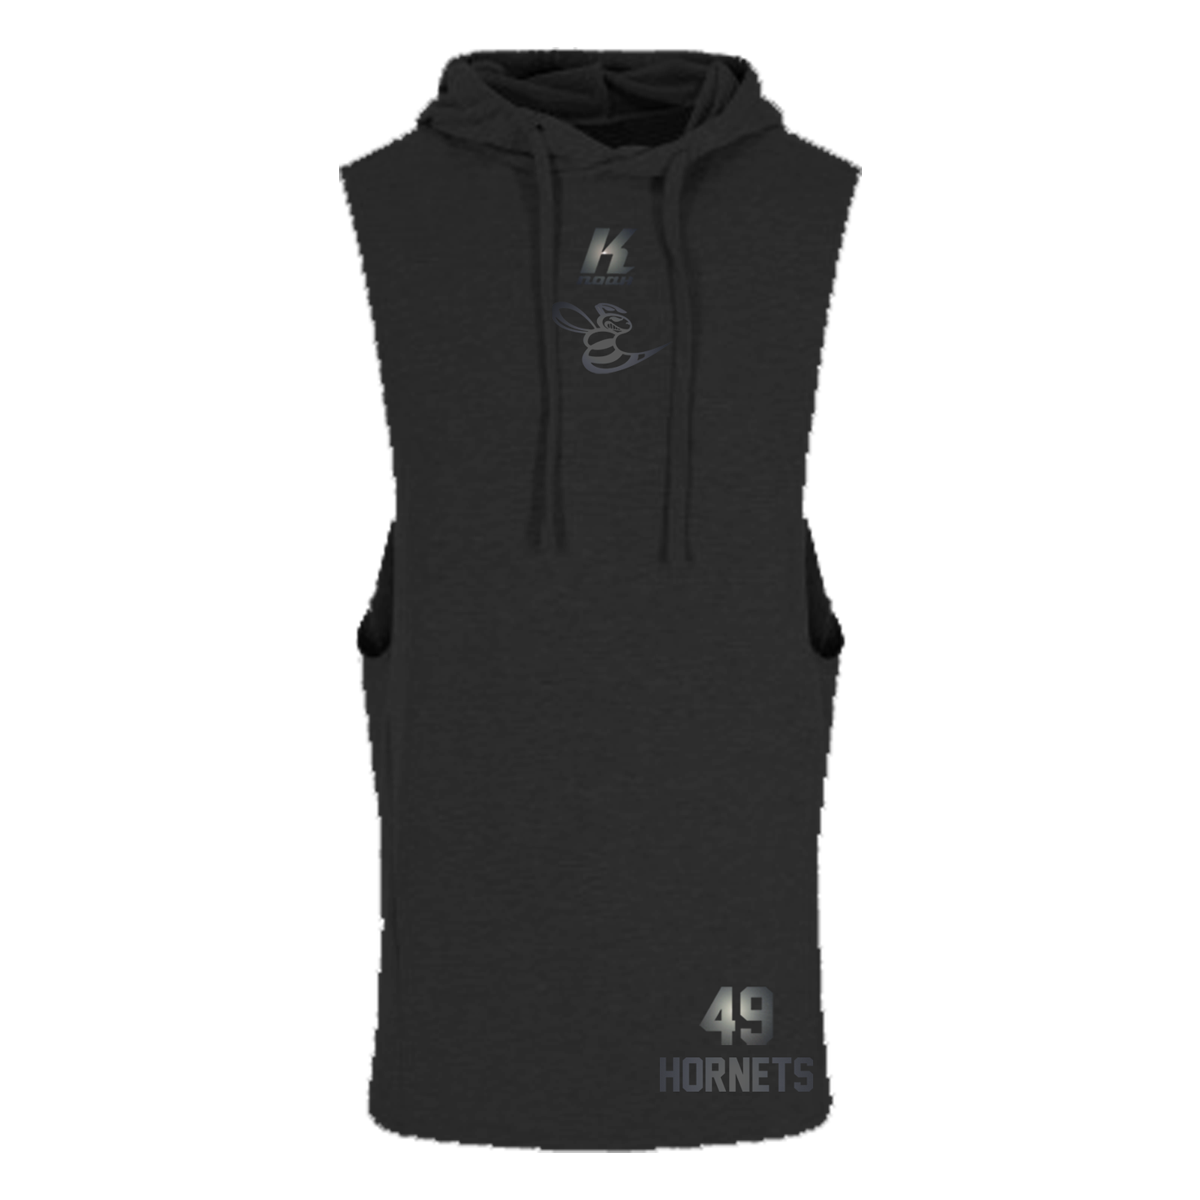 Hornets "Blackline" Sleeveless Muscle Hoodie JC053 with Playernumber or Initials